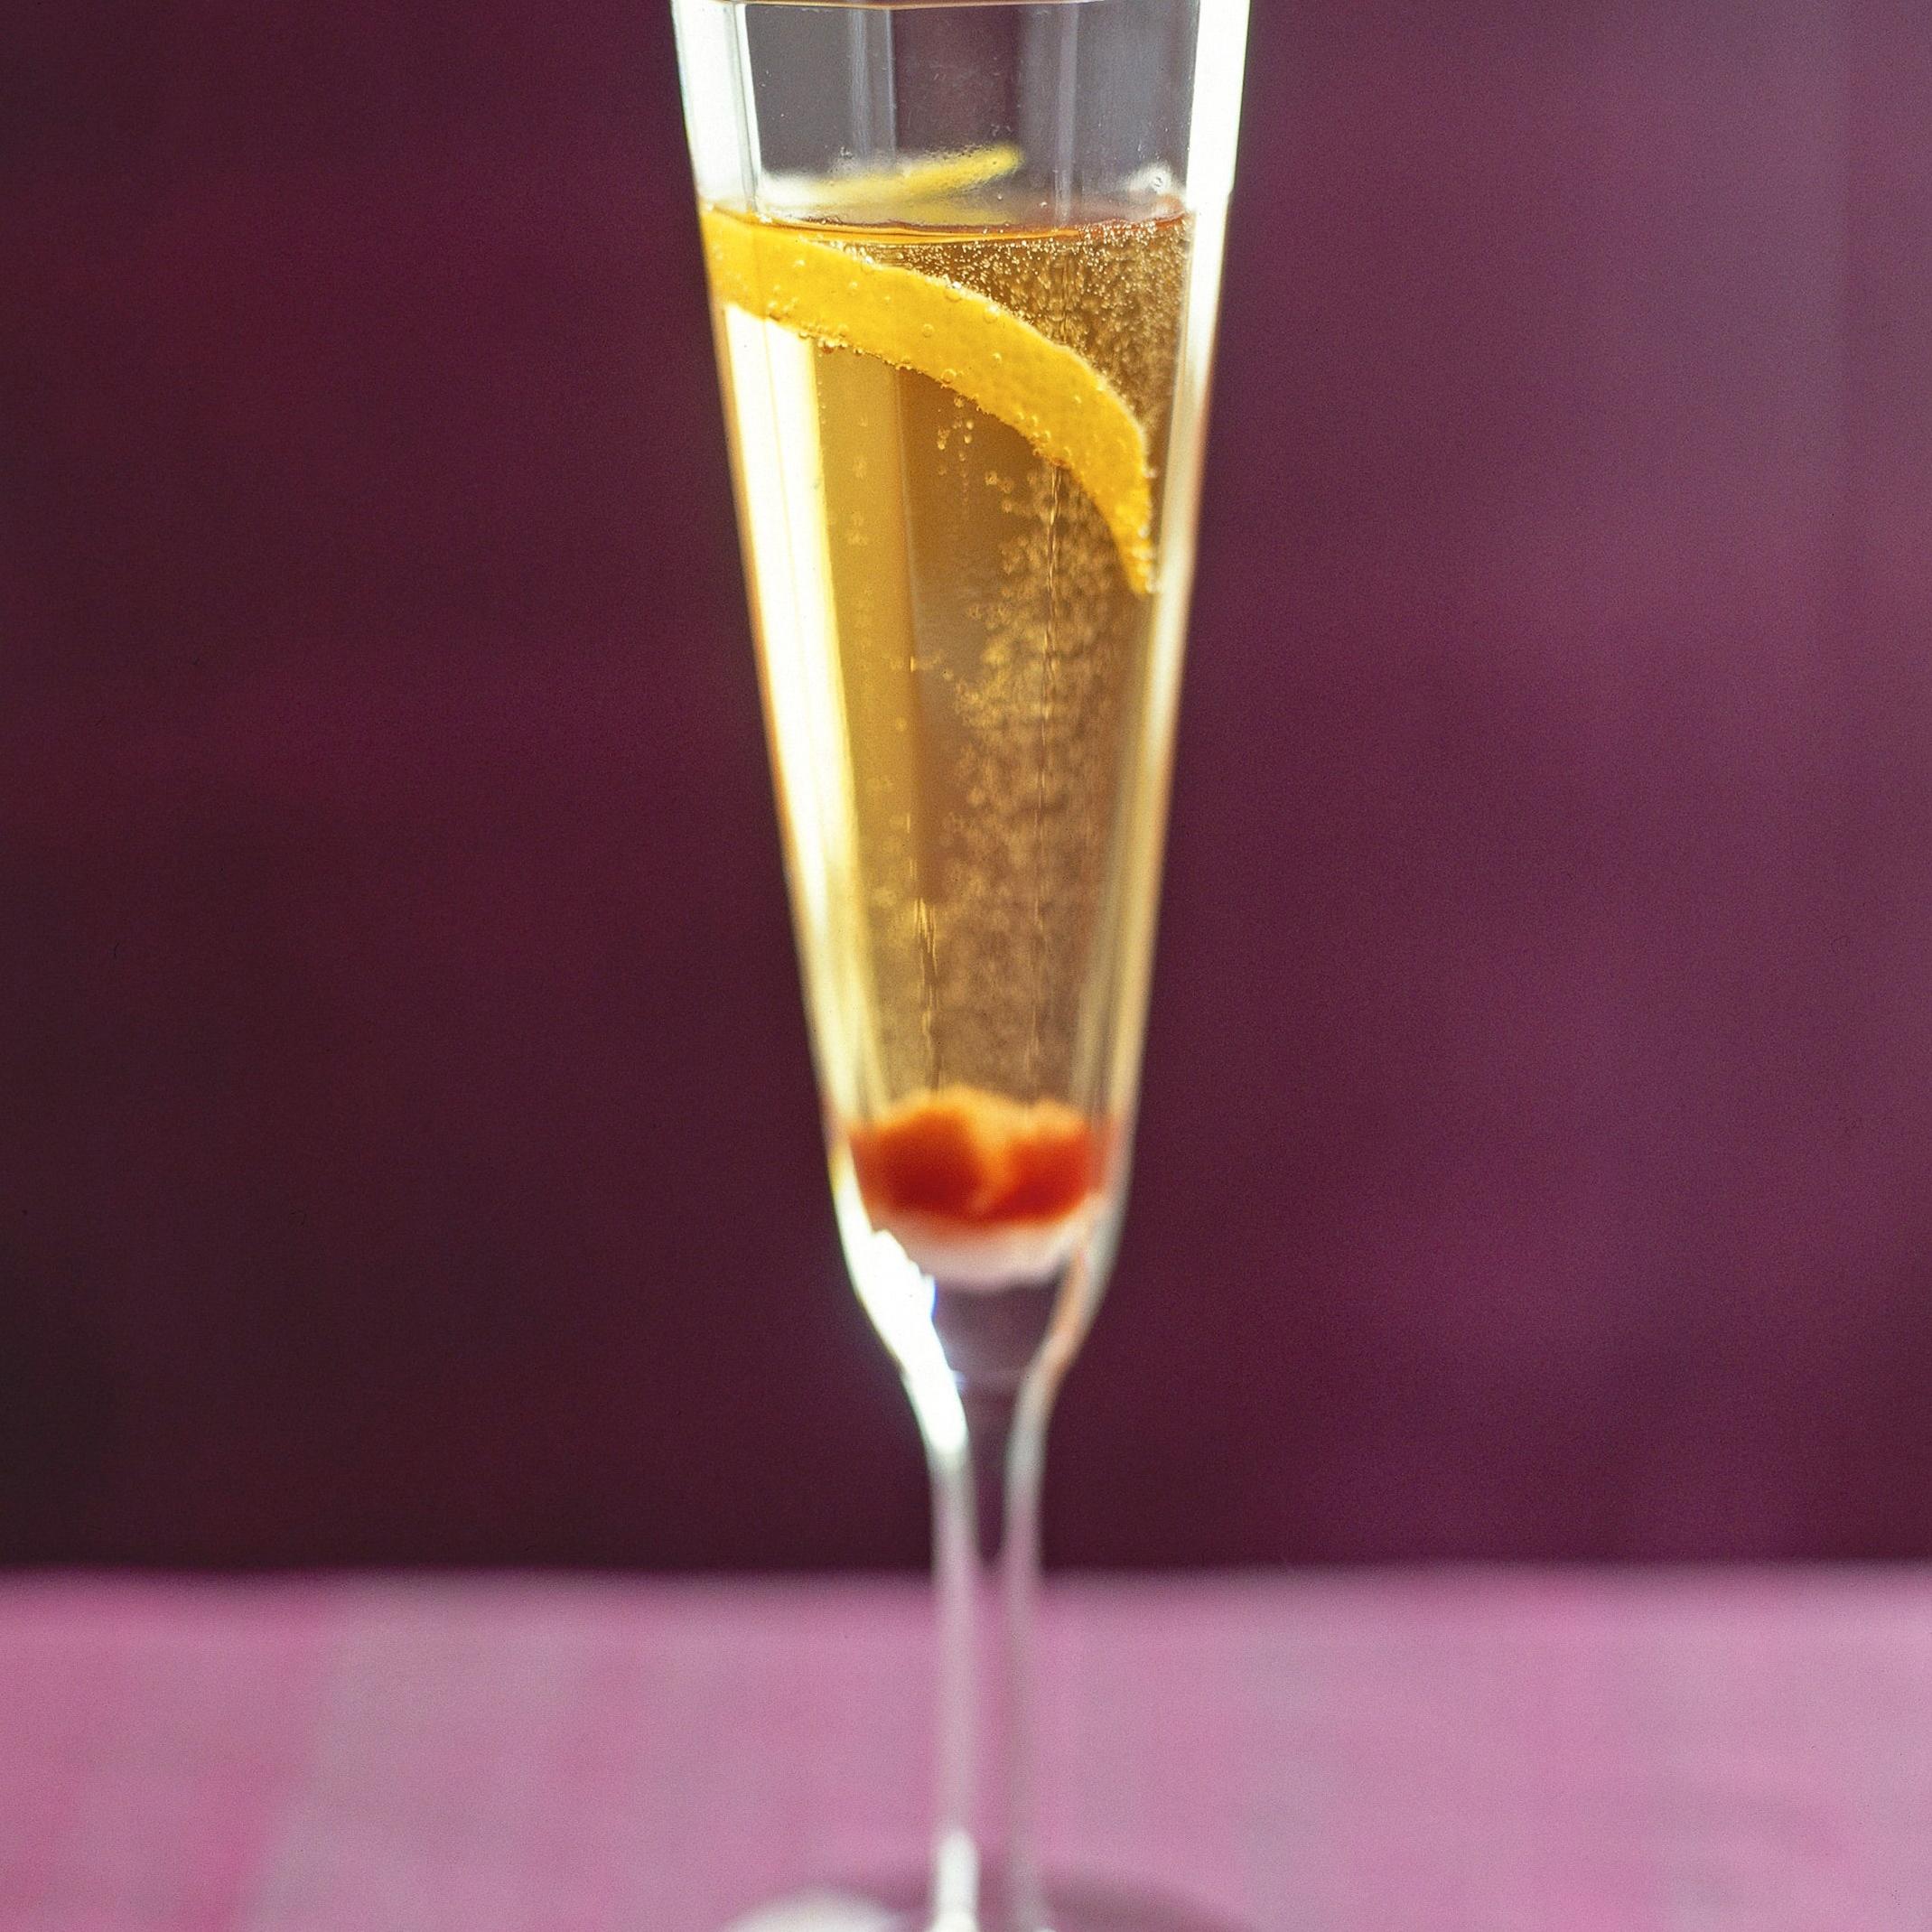  This cocktail is a delightful combination of bubbly champagne, brandy, and orange liqueur.